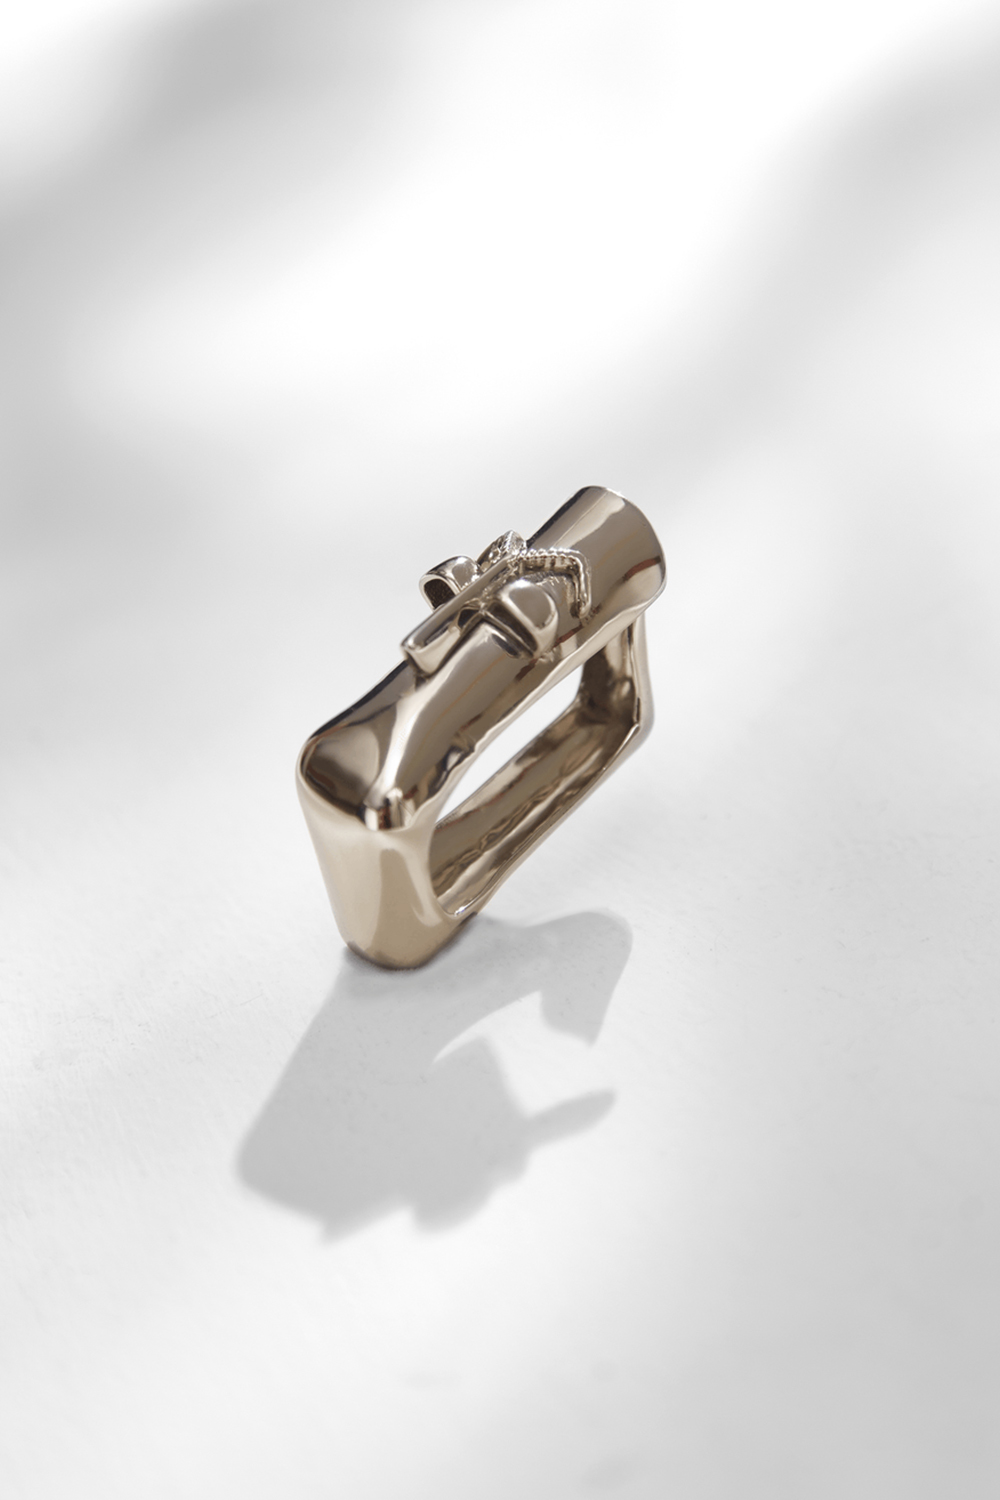 The Gavi Knuckle Ring